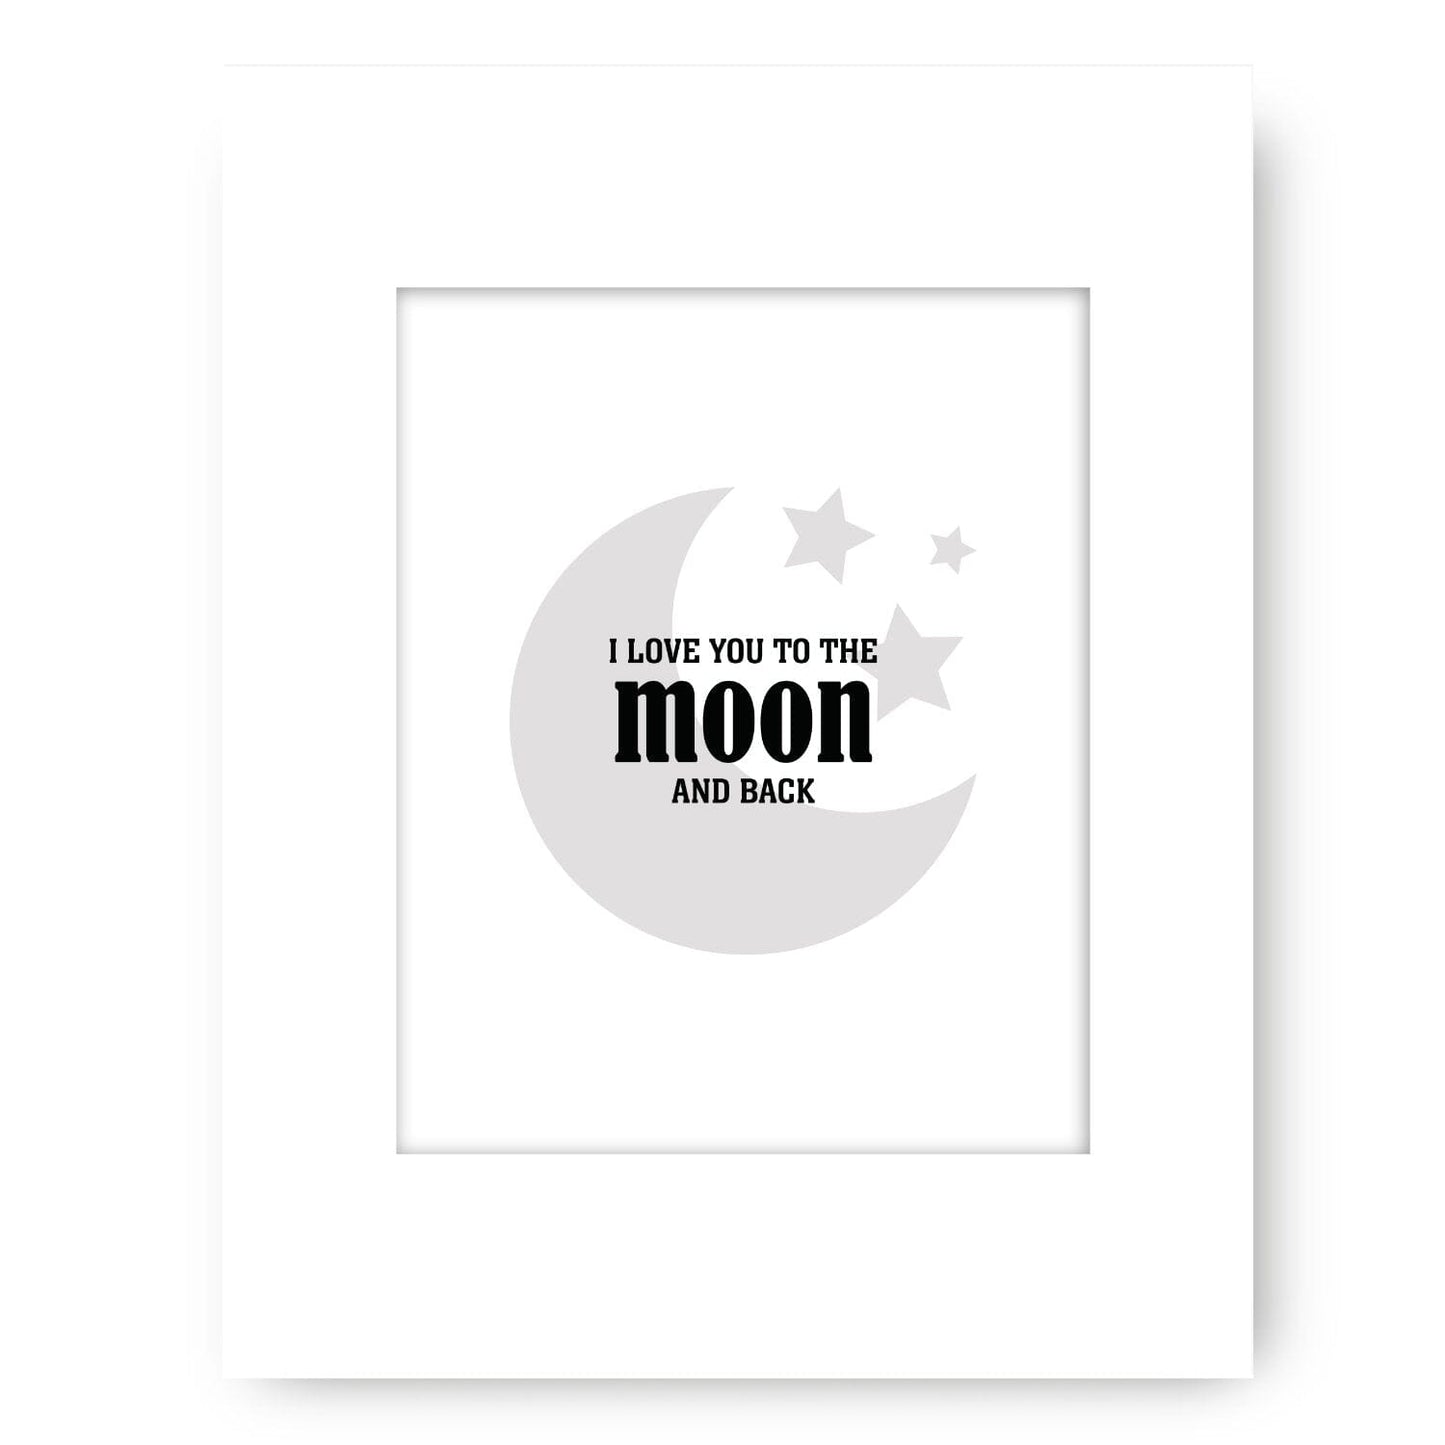 I Love You to the Moon and Back - Wise and Witty Art Wise and Wiseass Quotes Song Lyrics Art 8x10 White Matted Print 